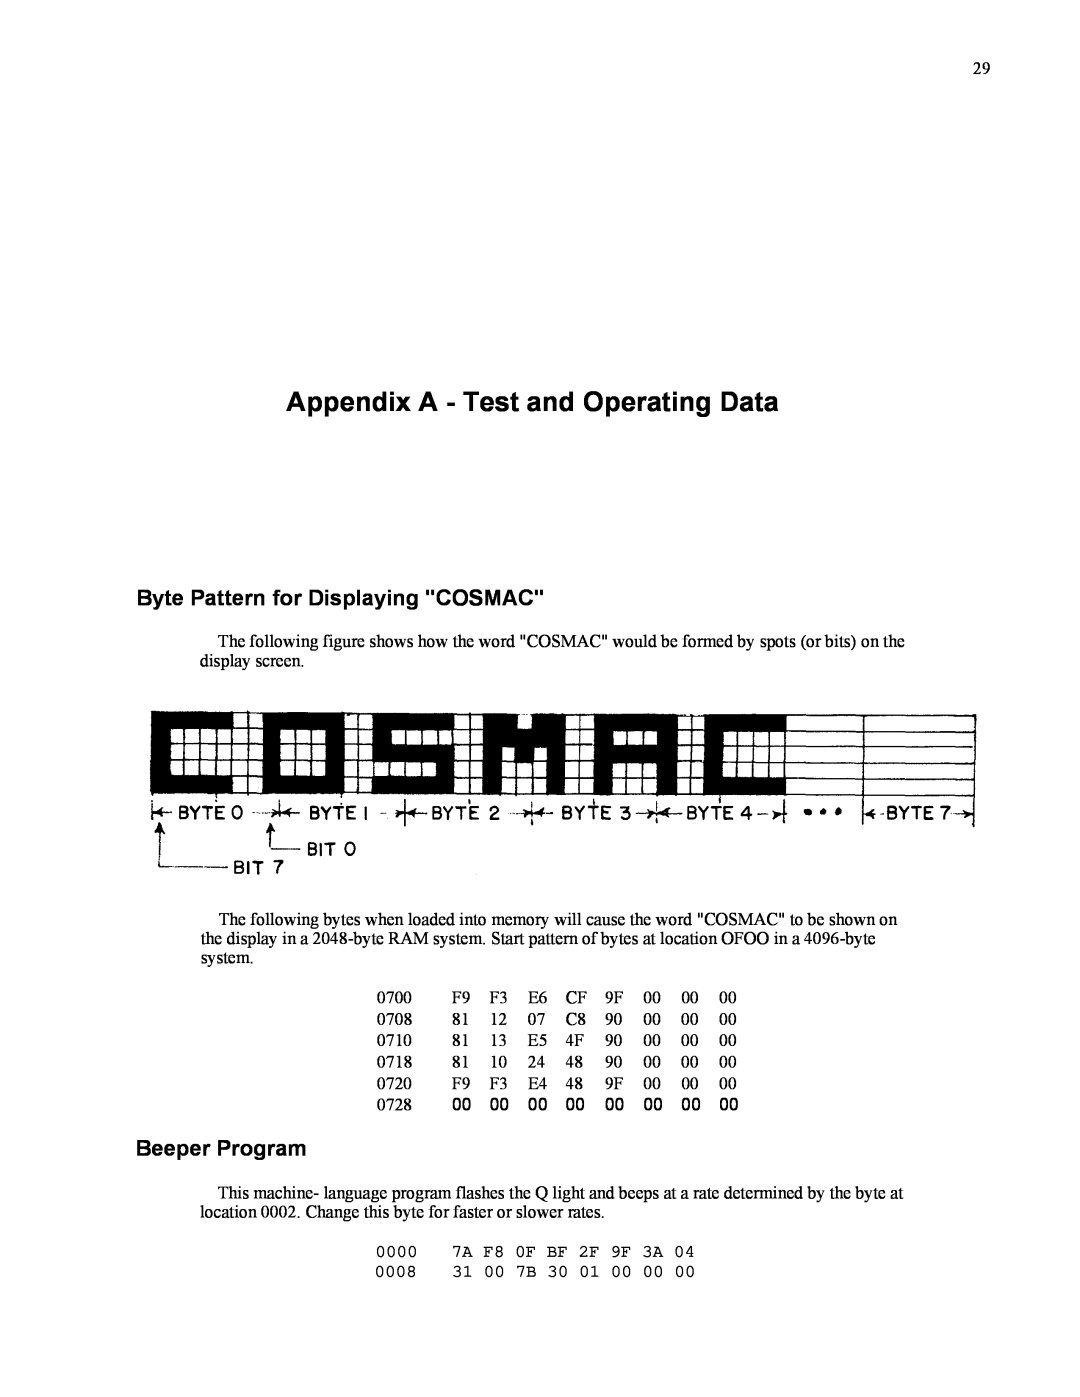 RCA CDP18S711 manual Appendix A - Test and Operating Data, Byte Pattern for Displaying COSMAC, Beeper Program 